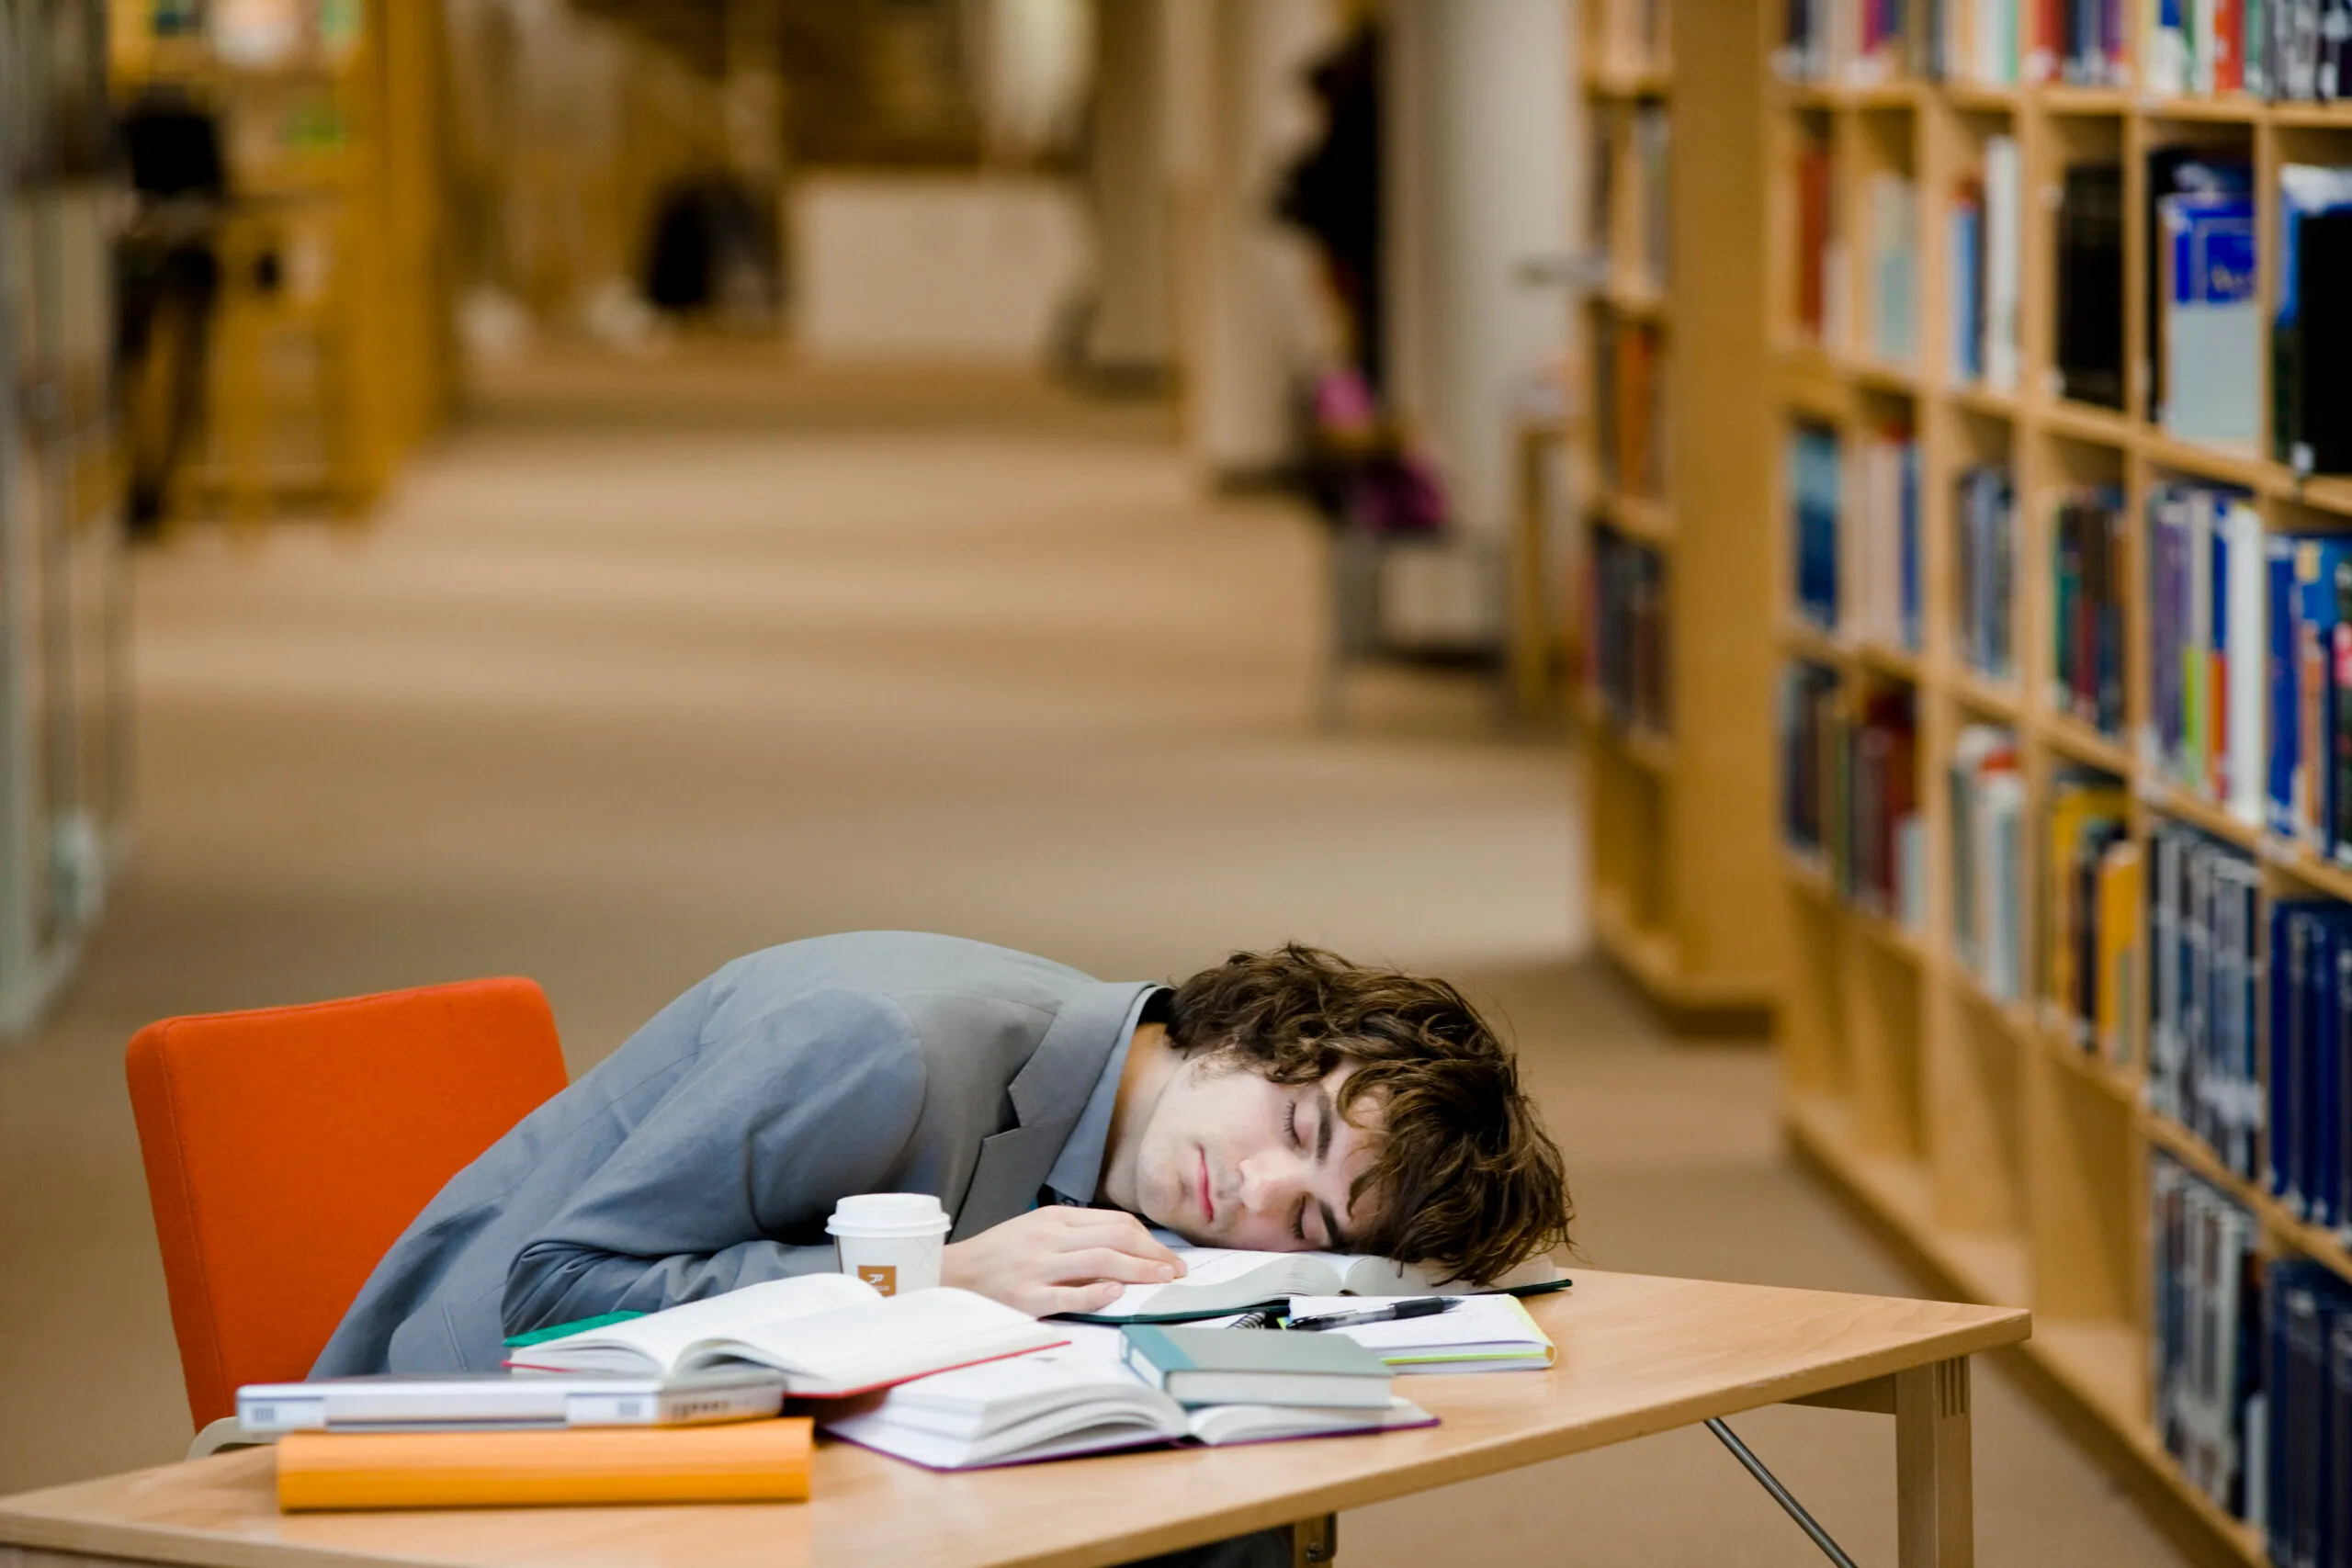 A student who has fallen asleep in a library Sweden.